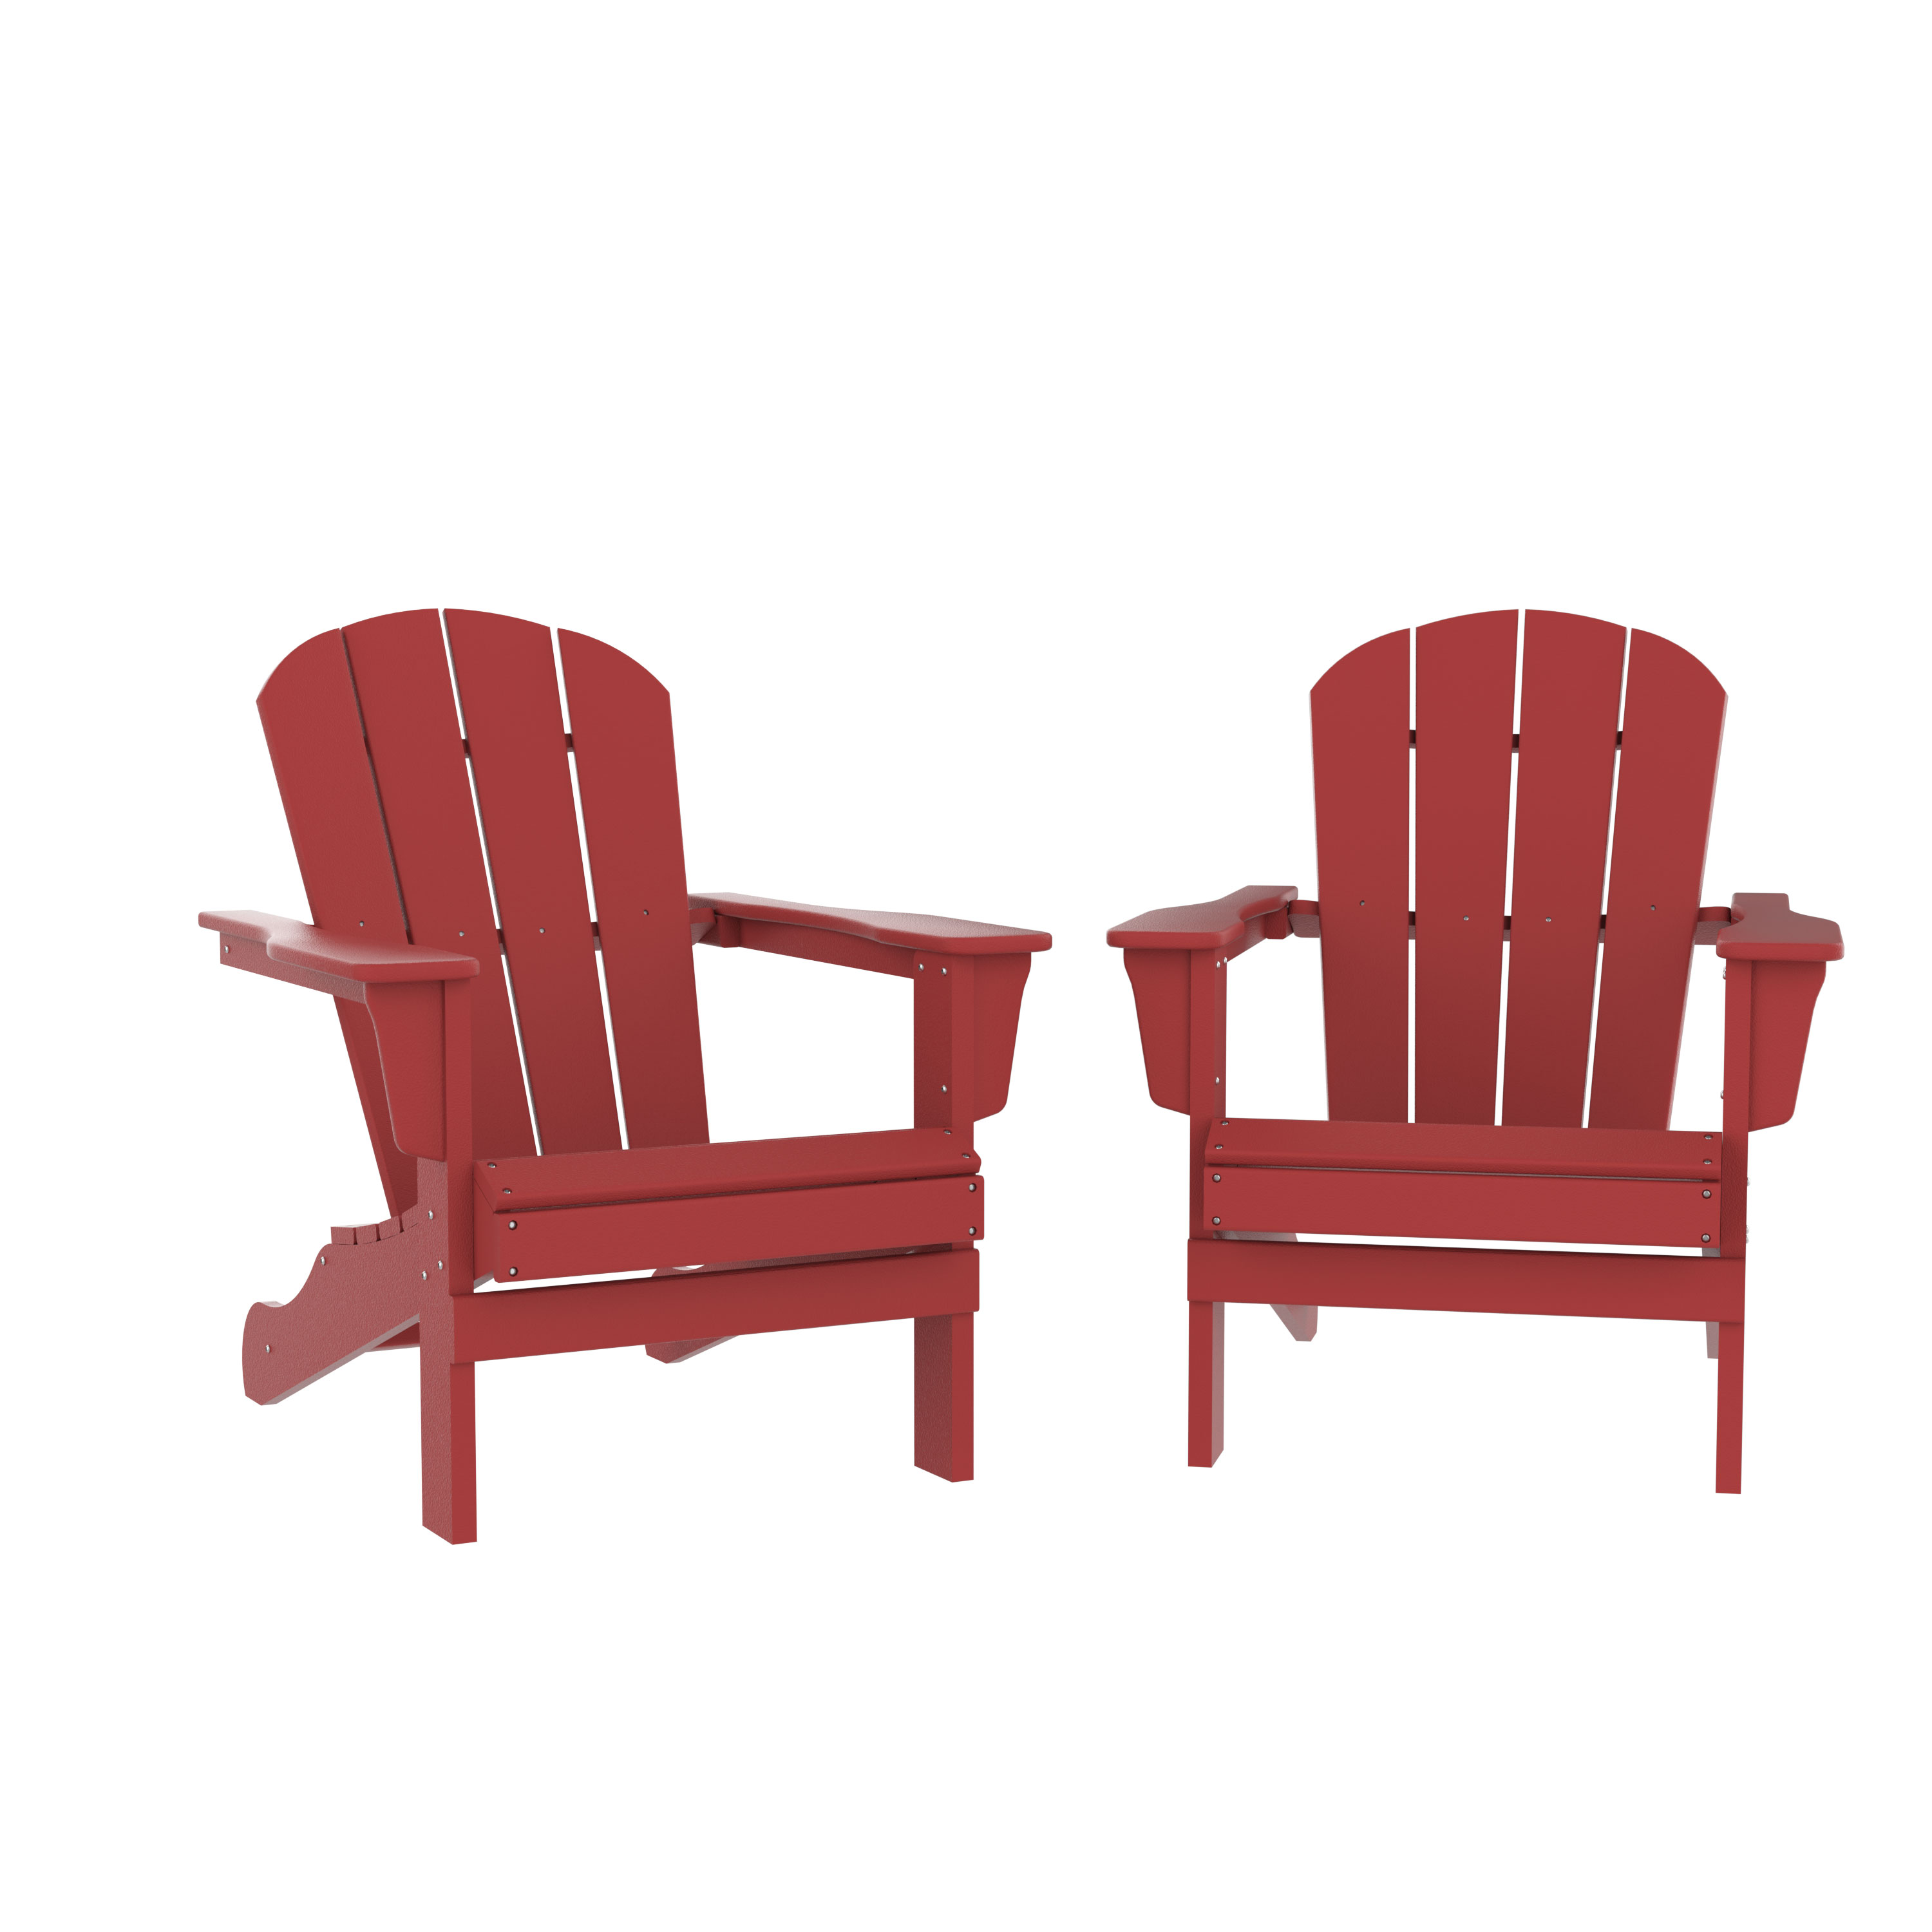 Clearance! HDPE Adirondack Chair, Fire Pit Chairs, Sand Chair, Patio Outdoor Chairs,DPE Plastic Resin Deck Chair, lawn chairs, Adult Size ,Weather Resistant for Patio/ Backyard/Garden, Red, Set of 2 - image 3 of 6